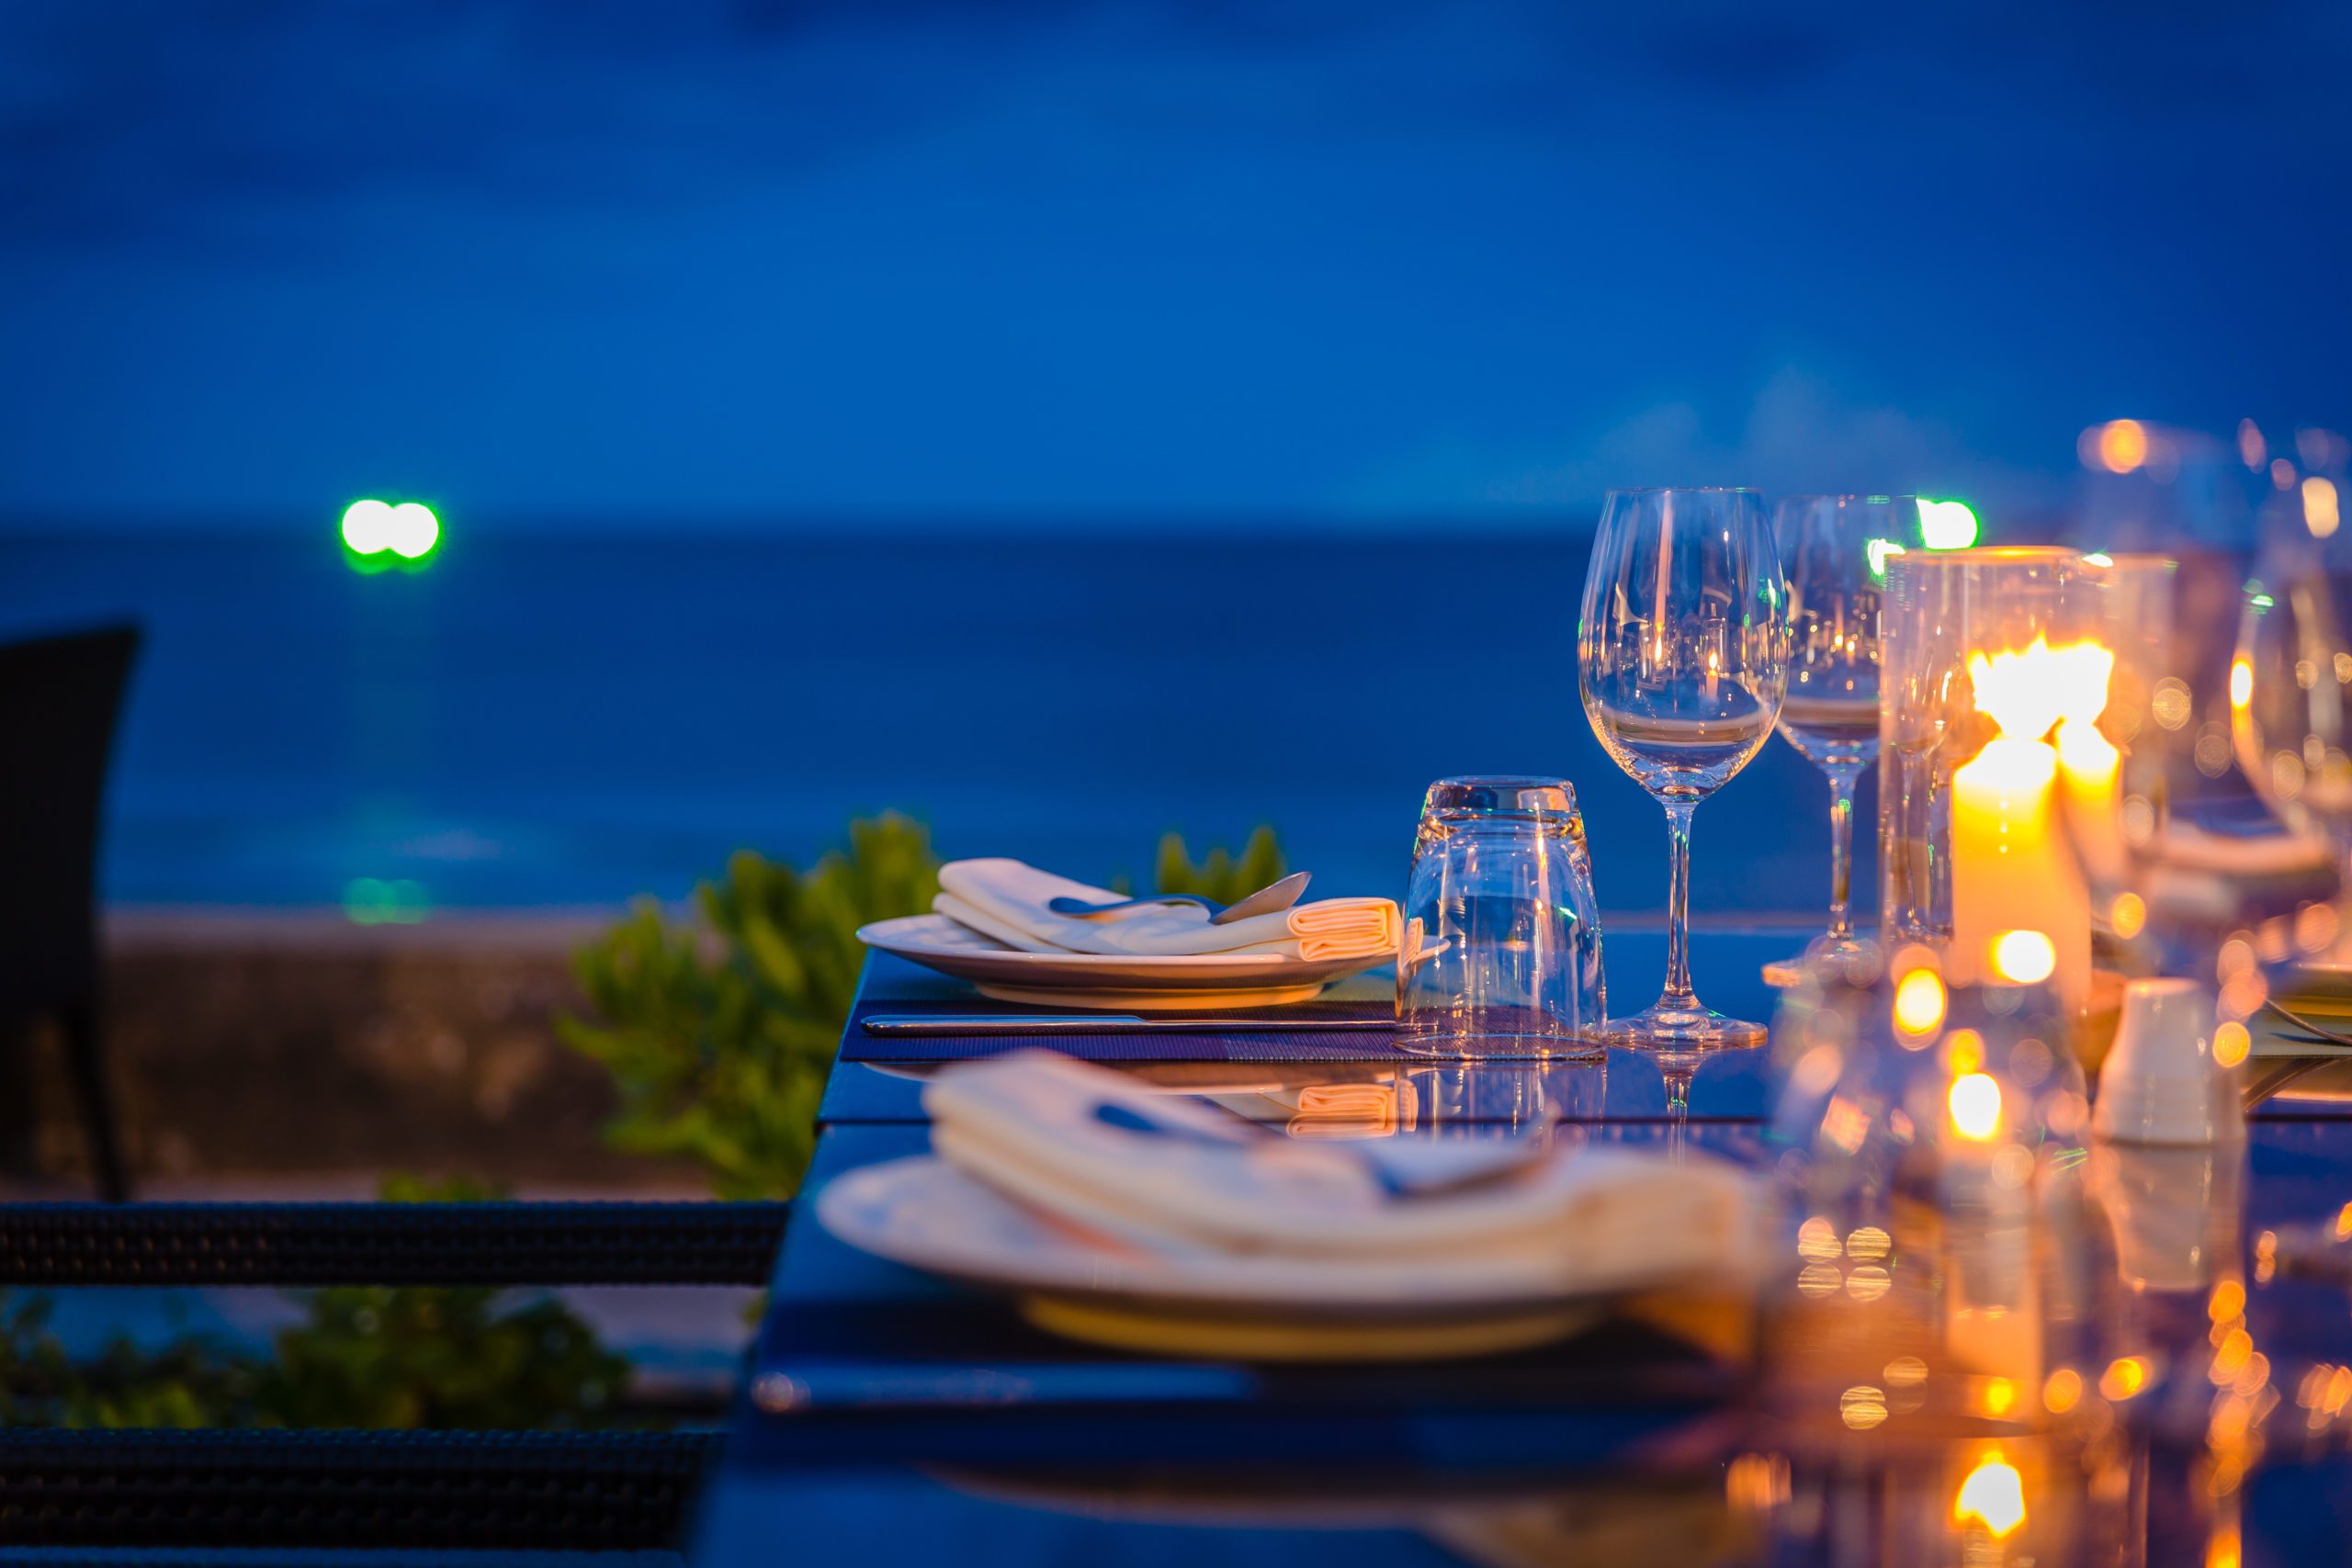 Beachside dinner table with plates and glasses